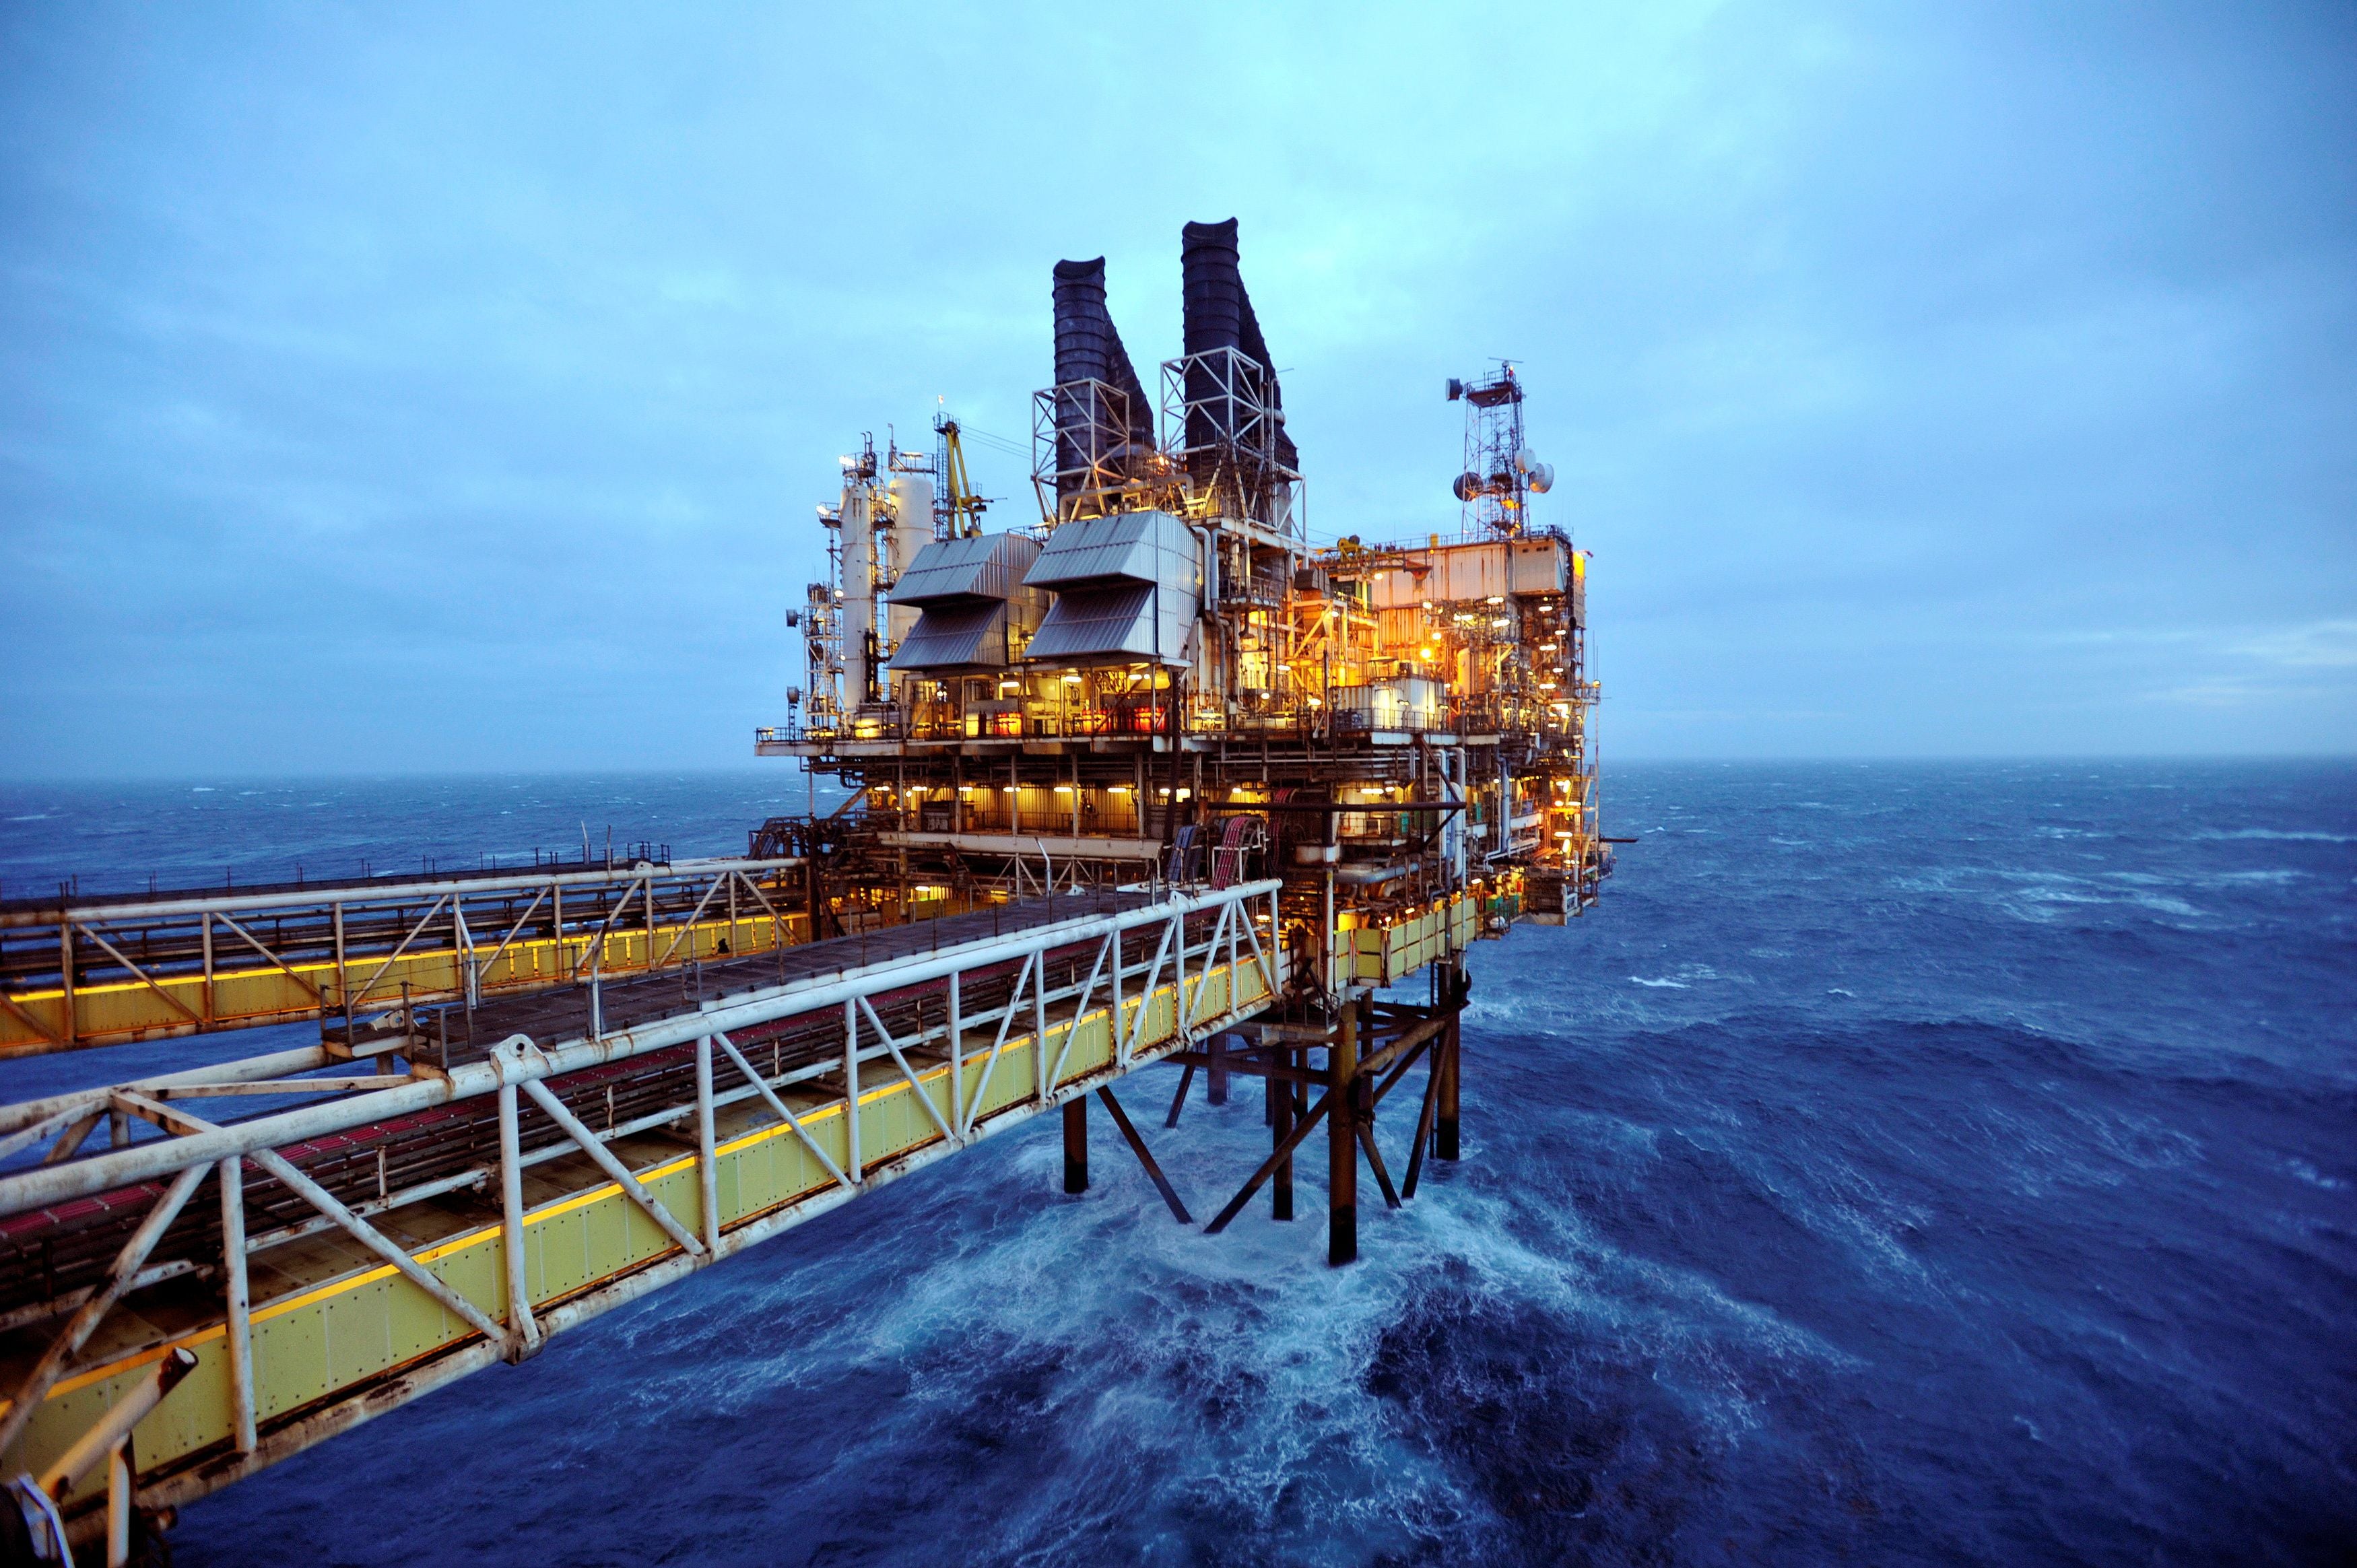 Campaigners argued that the drive to increase production of oil and gas in the North Sea was both unlawful and irrational